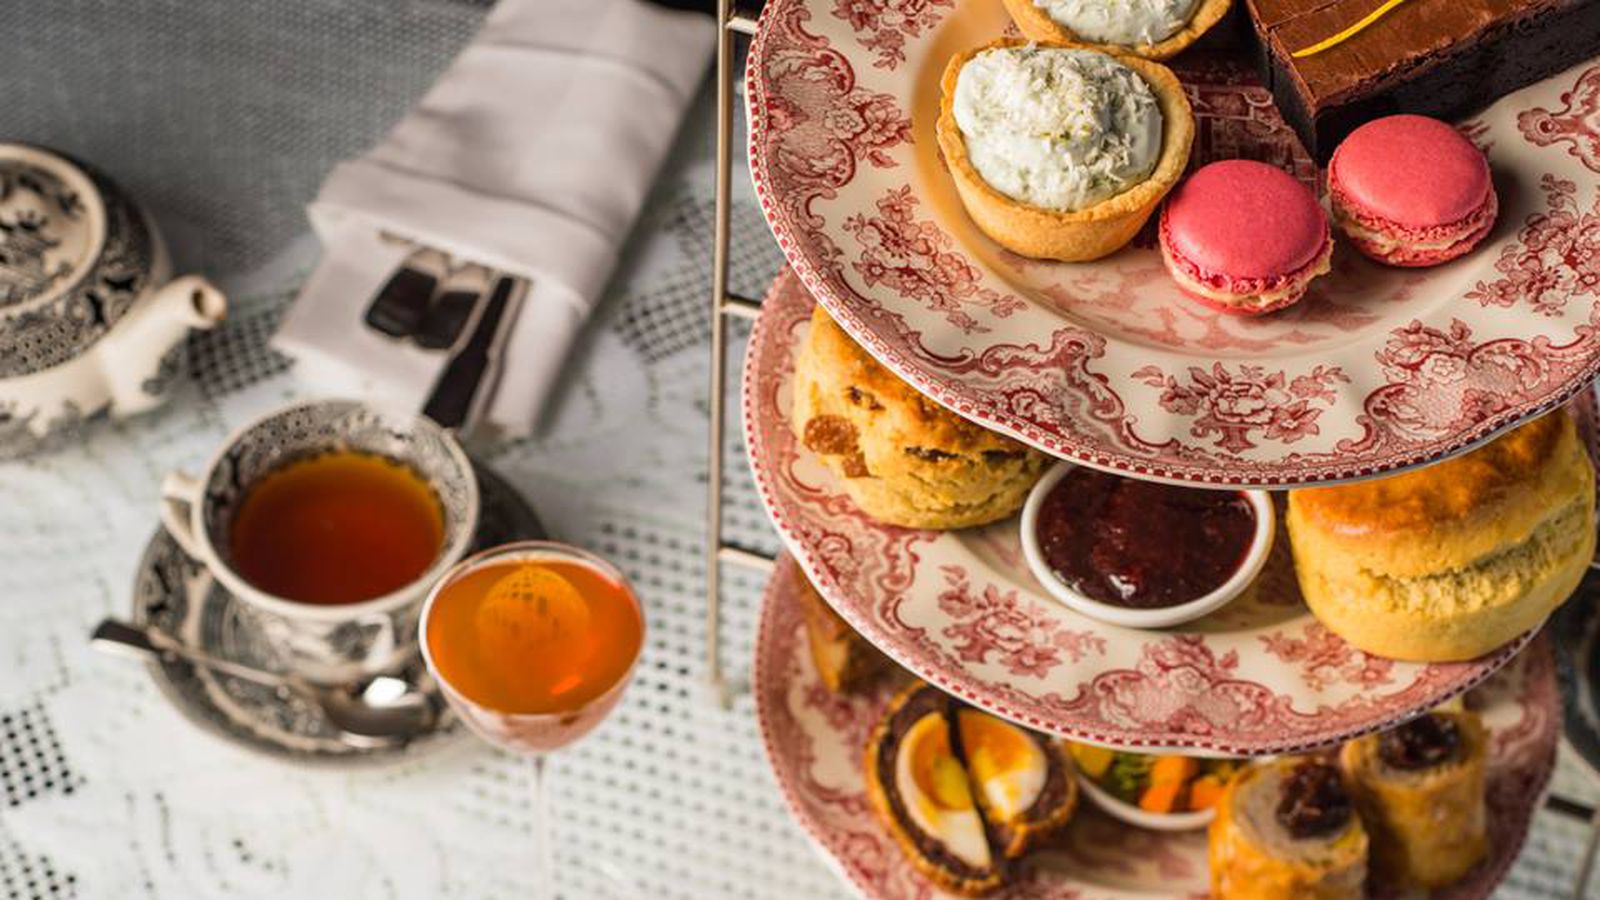 Where to Have Afternoon Tea in London - Eater Afternoon Gathering With Hot Drinks And Cakes